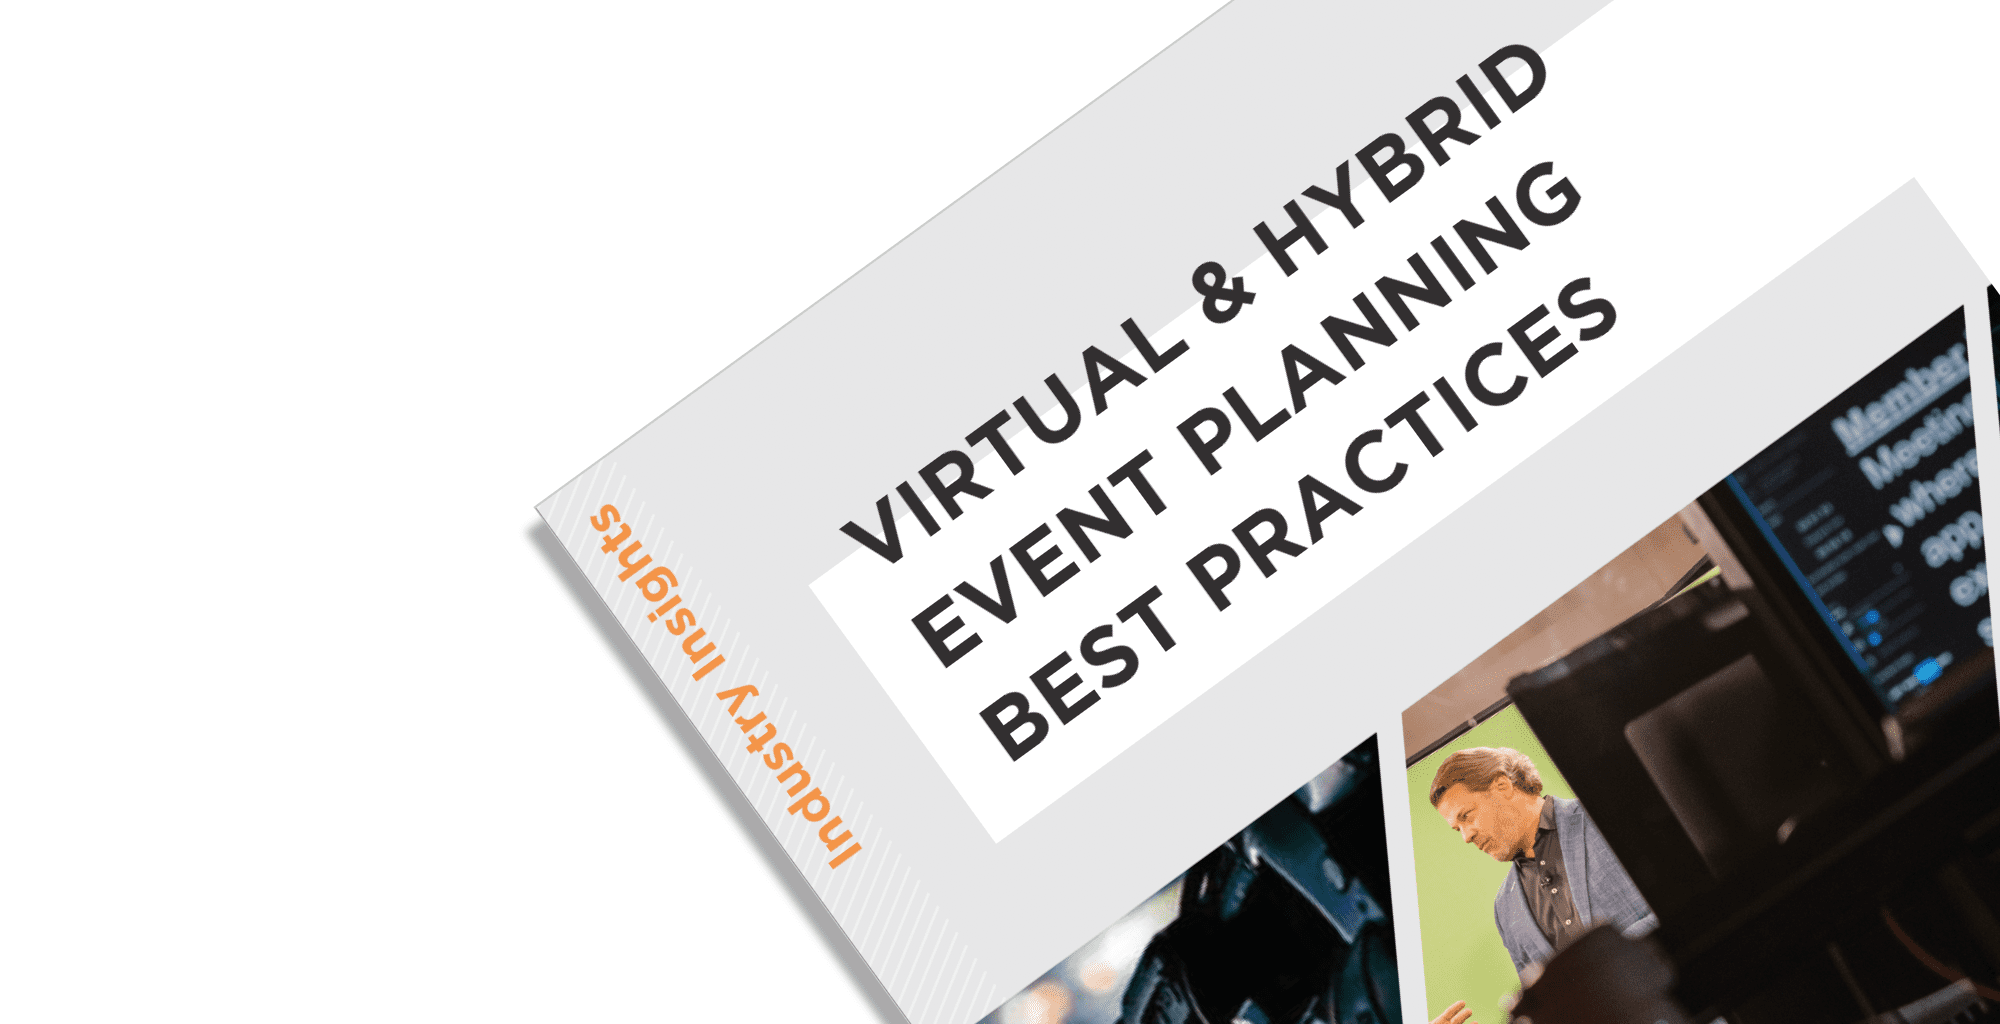 Featured image for “Virtual, Hybrid, or In-Person? Your guide for events”